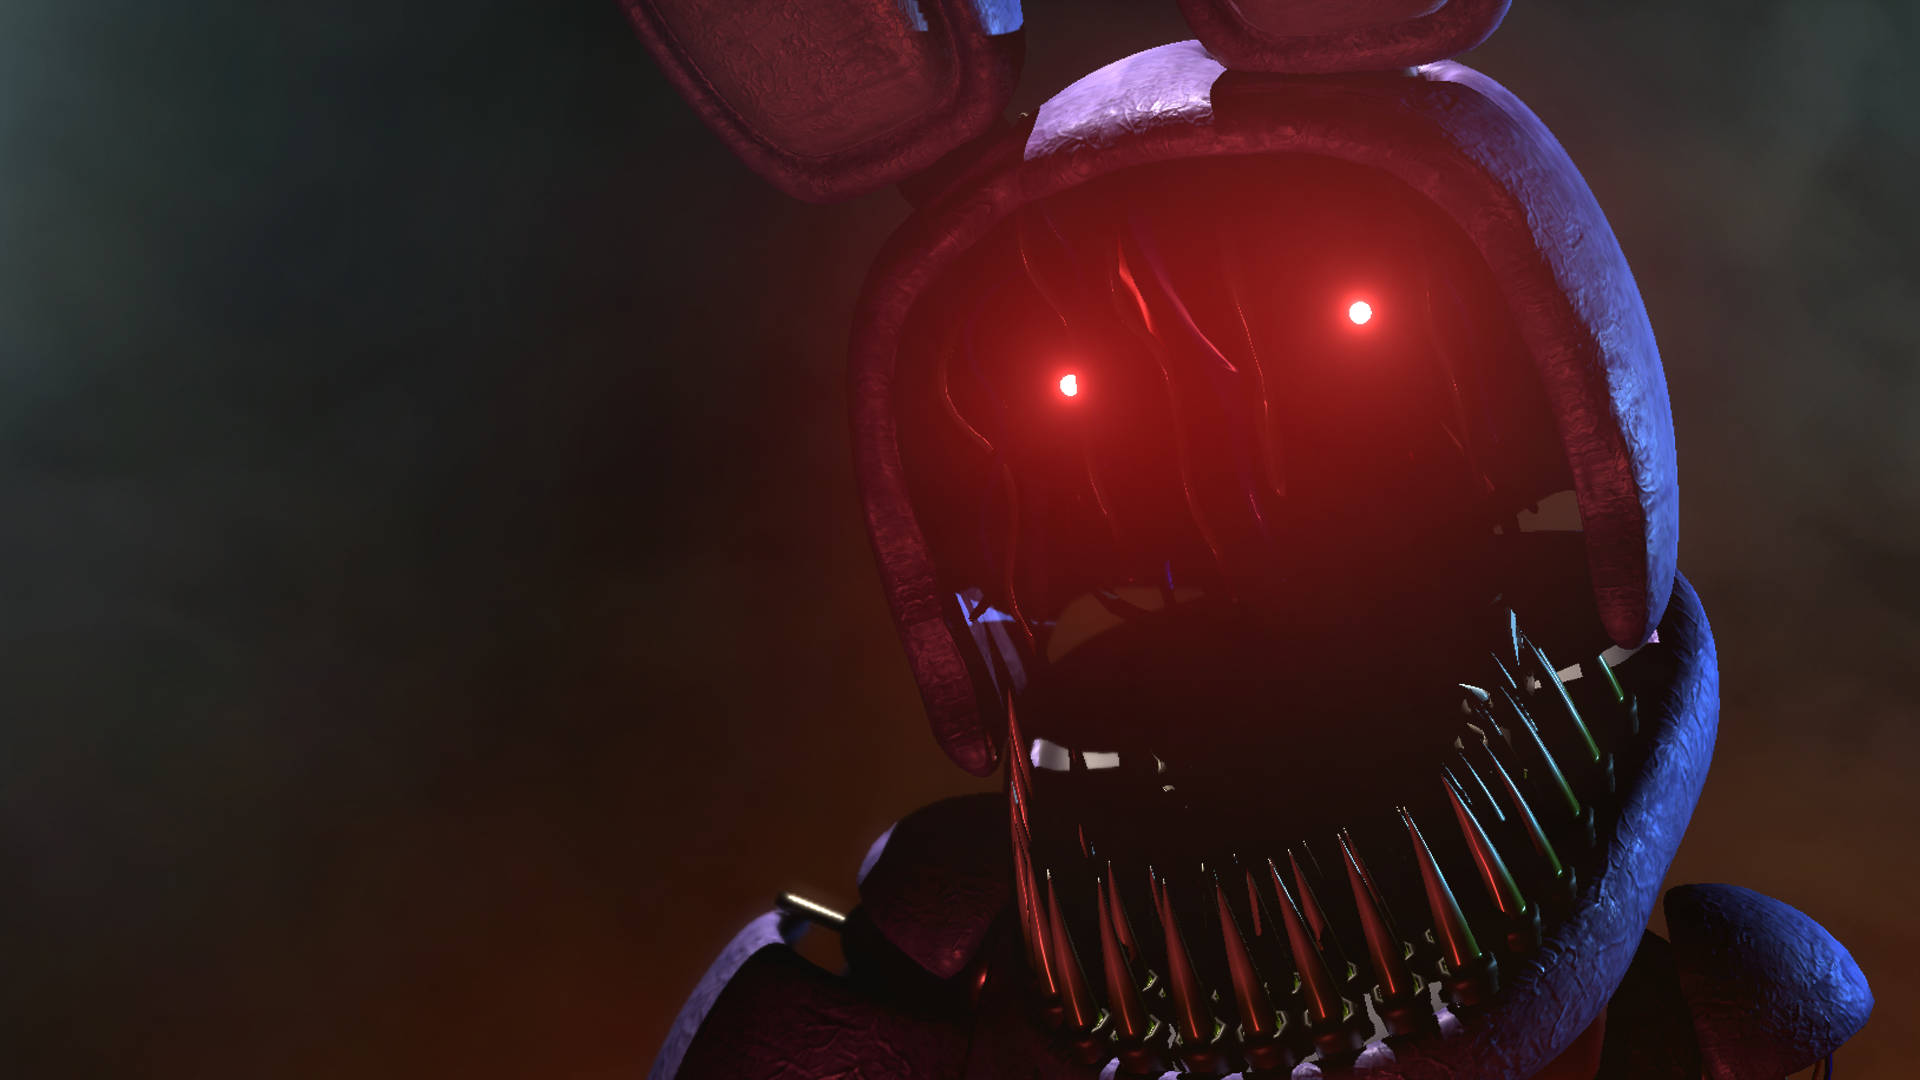 Now You Have a Nightmare in Bonnie's Remake of FNaF Wallpaper